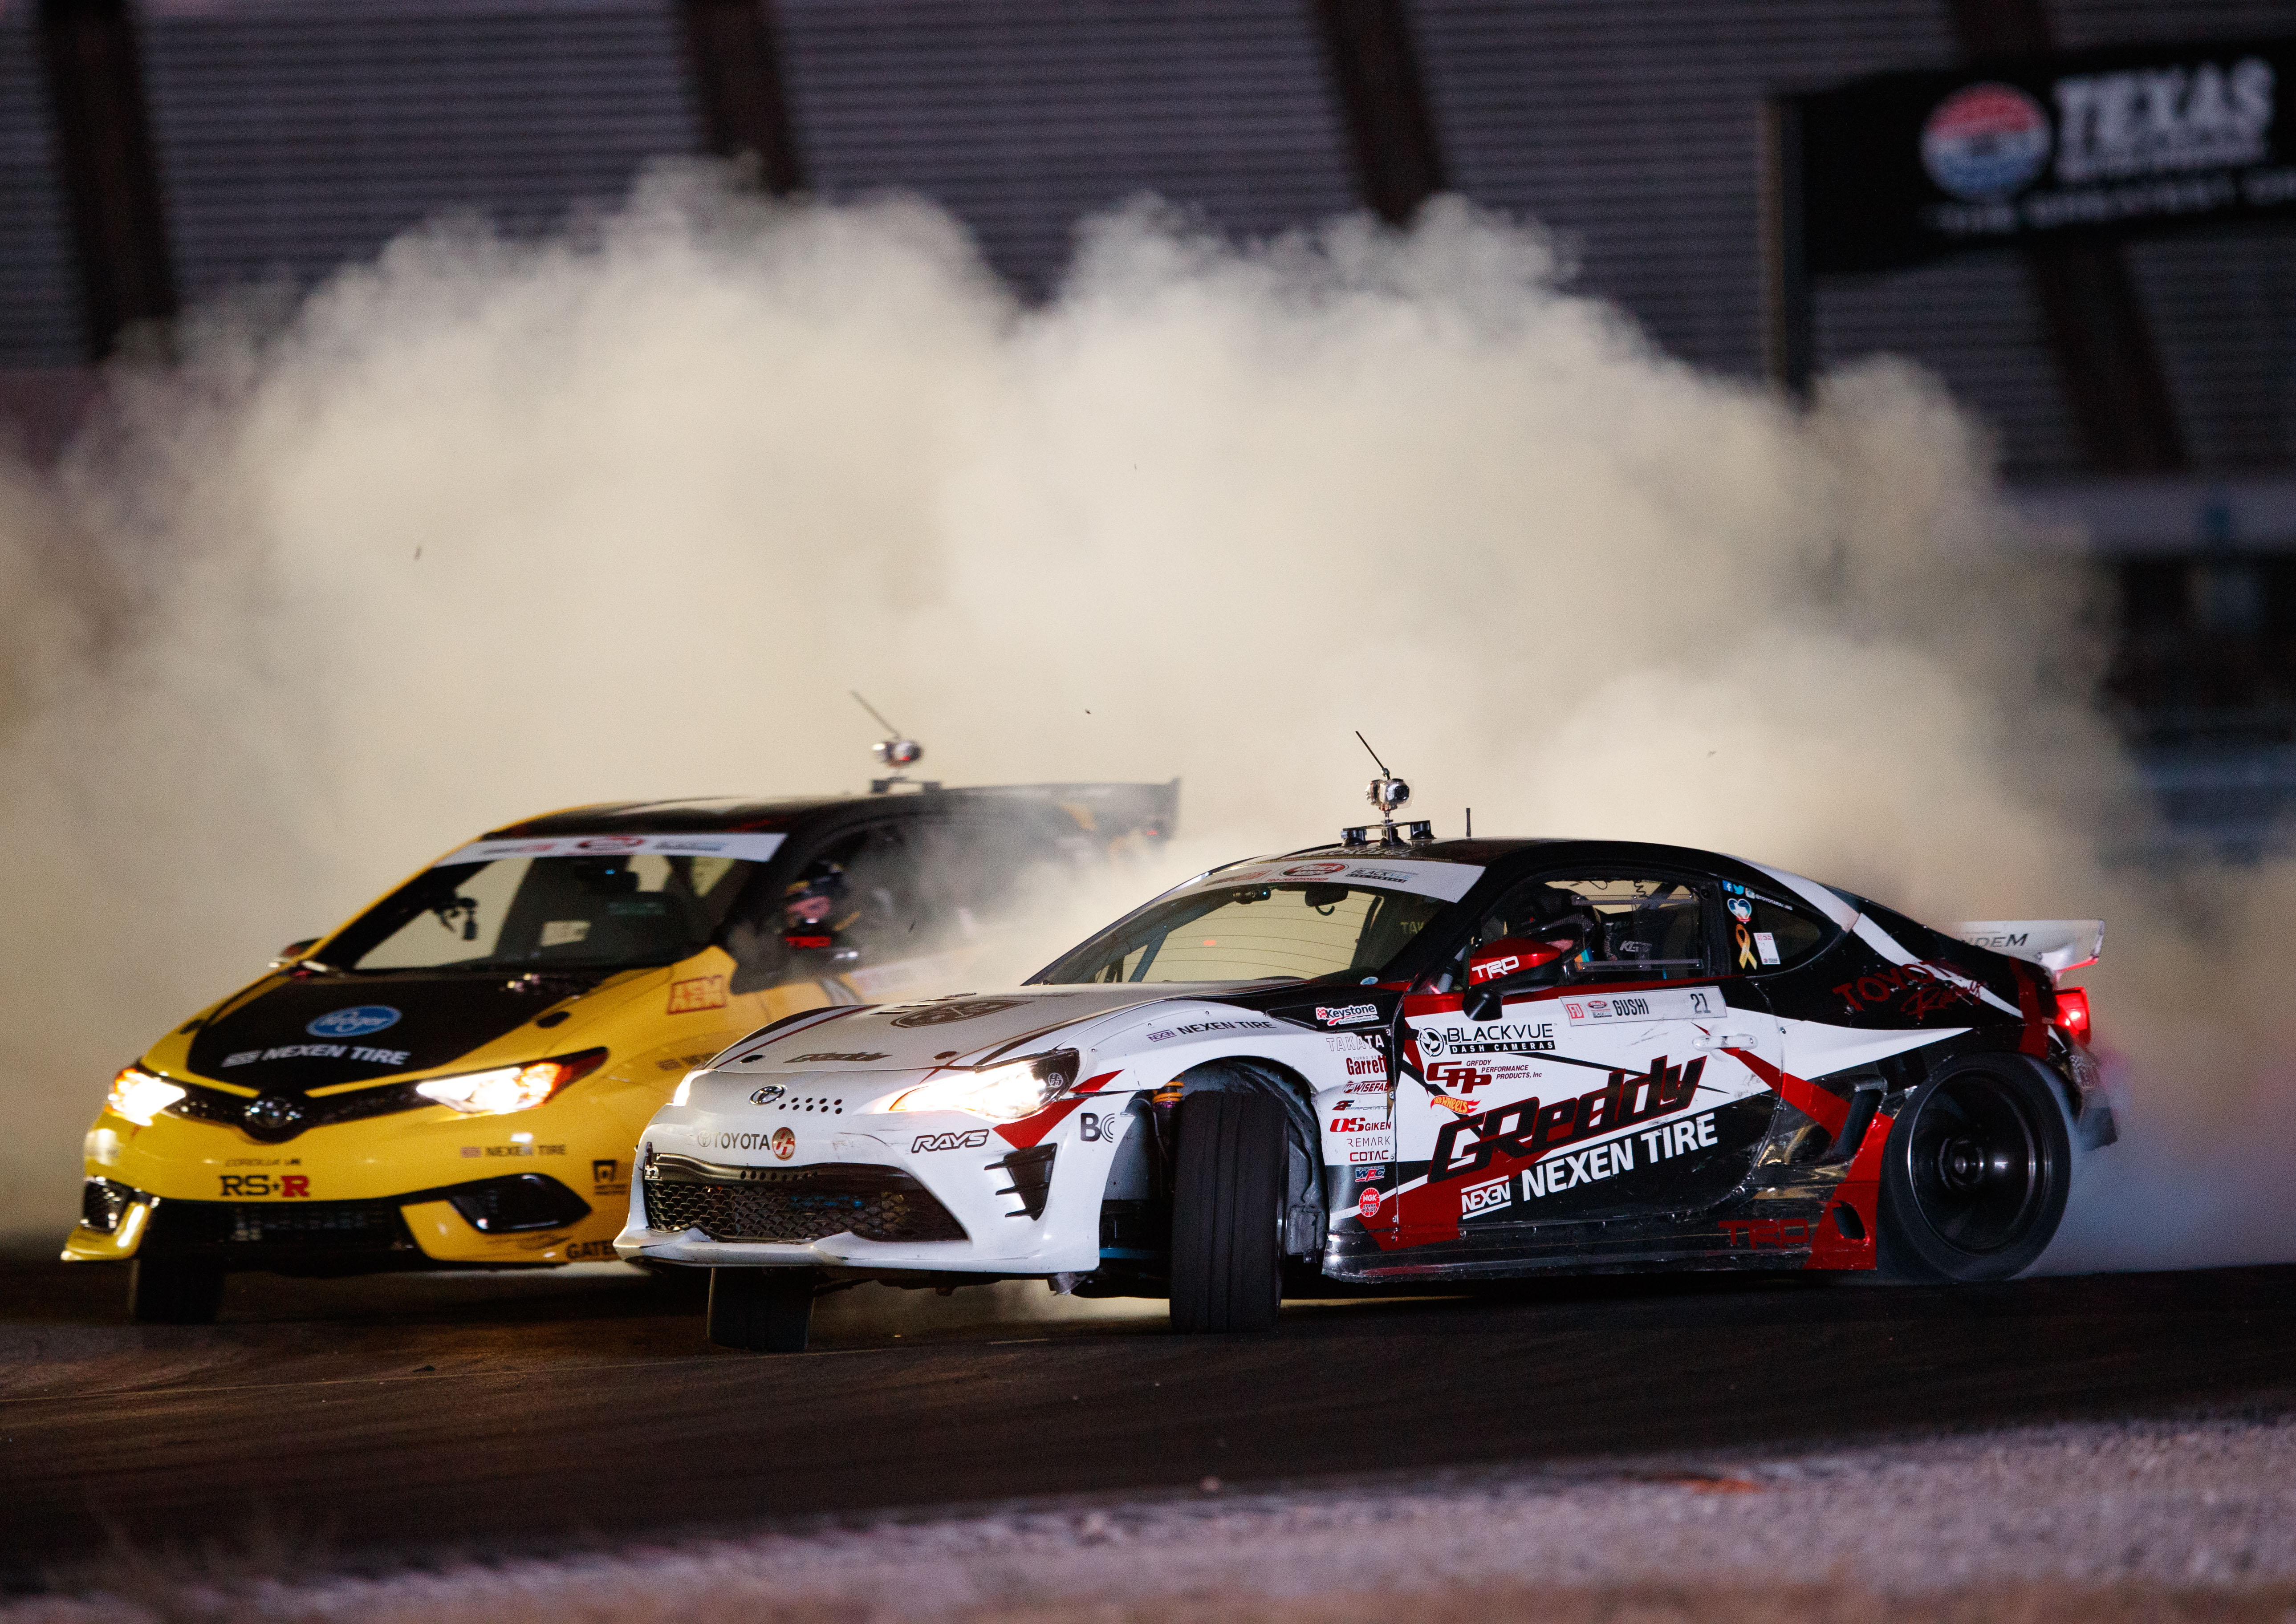 Drift Finale at Irwindale, while NASCAR and NHRA Playoffs Roll Along